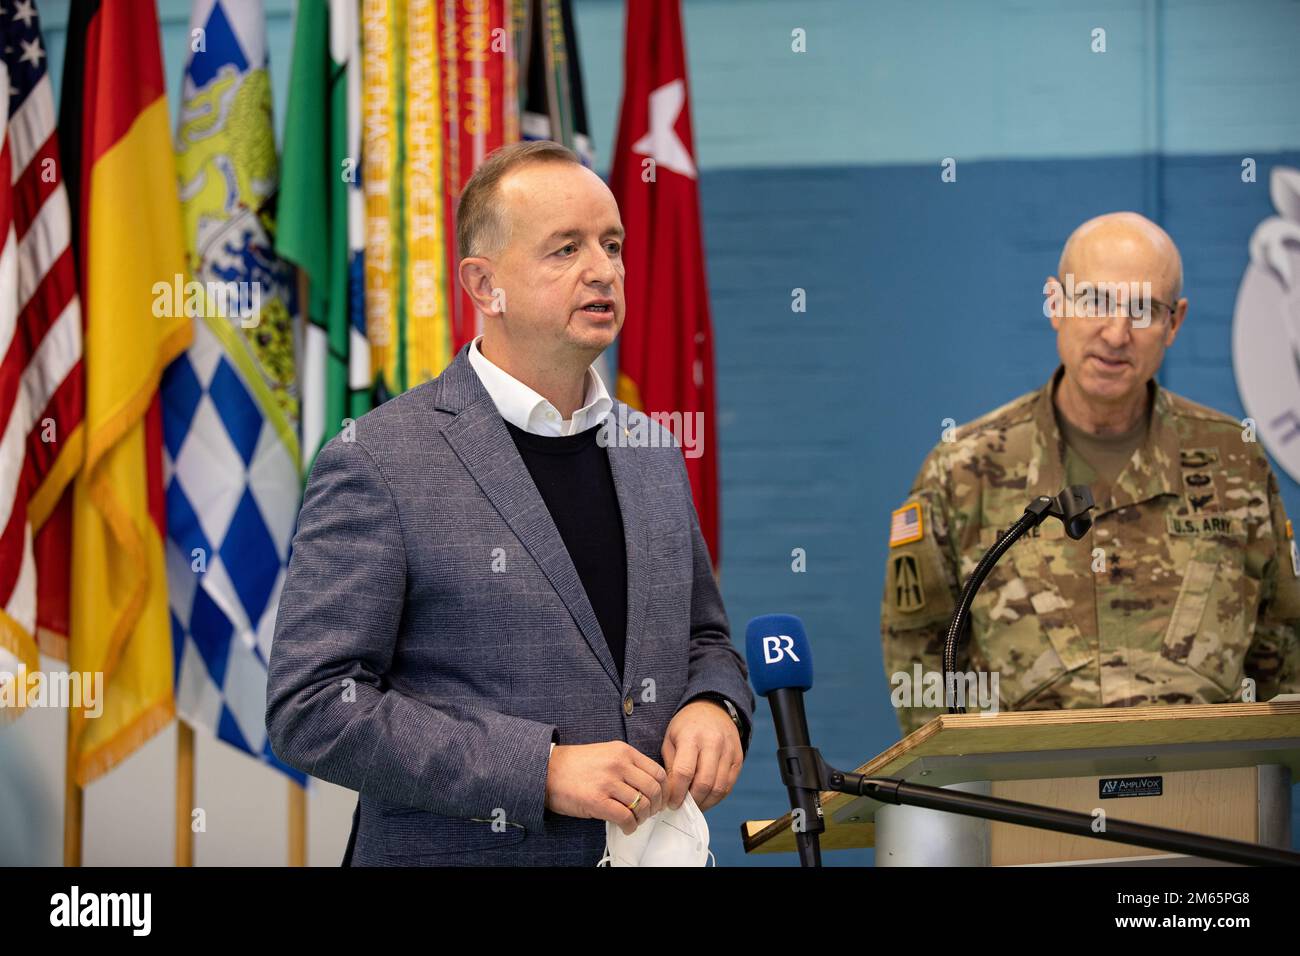 ANSBACH, Germany - Lord Mayor Thomas Deffner, lord mayor of the city of Ansbach, addresses the press during a press conference in Ansbach after a welcome ceremony at Barton Barracks in Ansbach, Germany, Tuesday, April 5. During the ceremony, the V Corps headquarters and the headquarters and headquarters battalion uncased their colors at their temporary home. The presence of the entire Victory Corps headquarters in Europe expands U.S. Army Europe and Africa’s ability to command land forces in Europe and sends a strong message to our NATO allies and partners that the United States is committed t Stock Photo